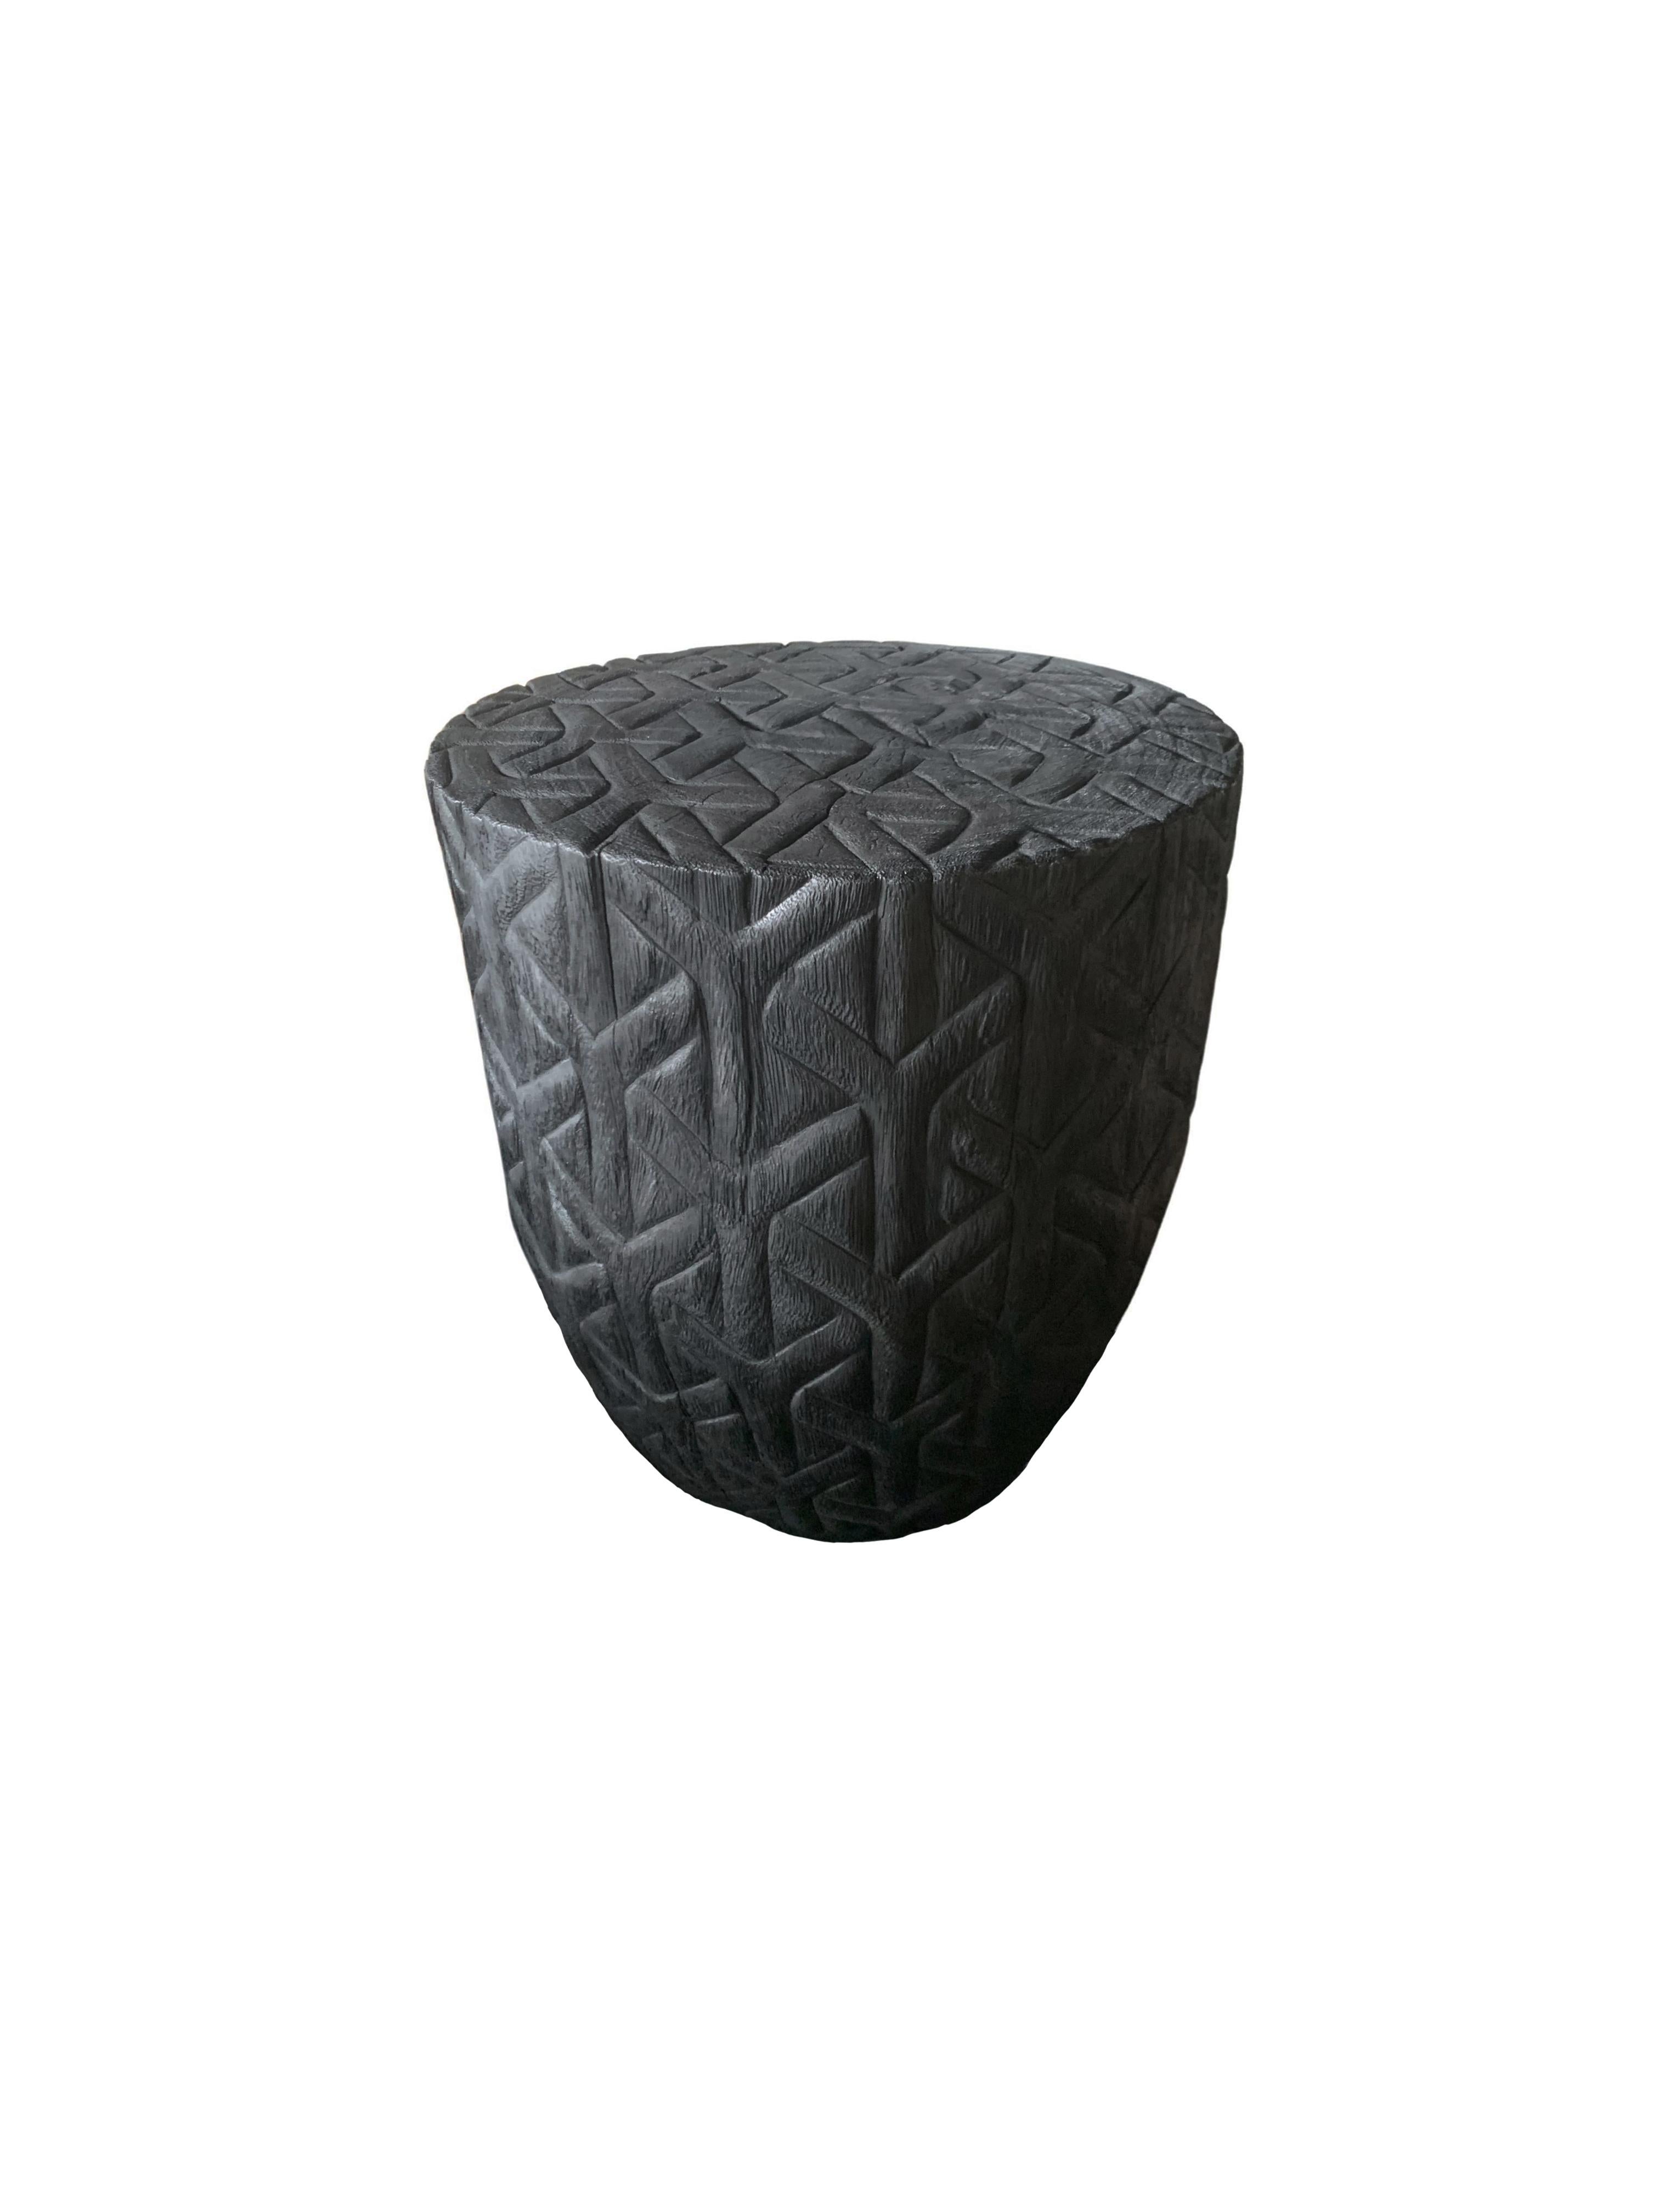 A wonderfully sculptural side table with a geometric pattern hand-carved on all sides. Its rich black pigment was achieved through burning the wood three times. Its neutral pigment and subtle wood texture makes it perfect for any space. A uniquely